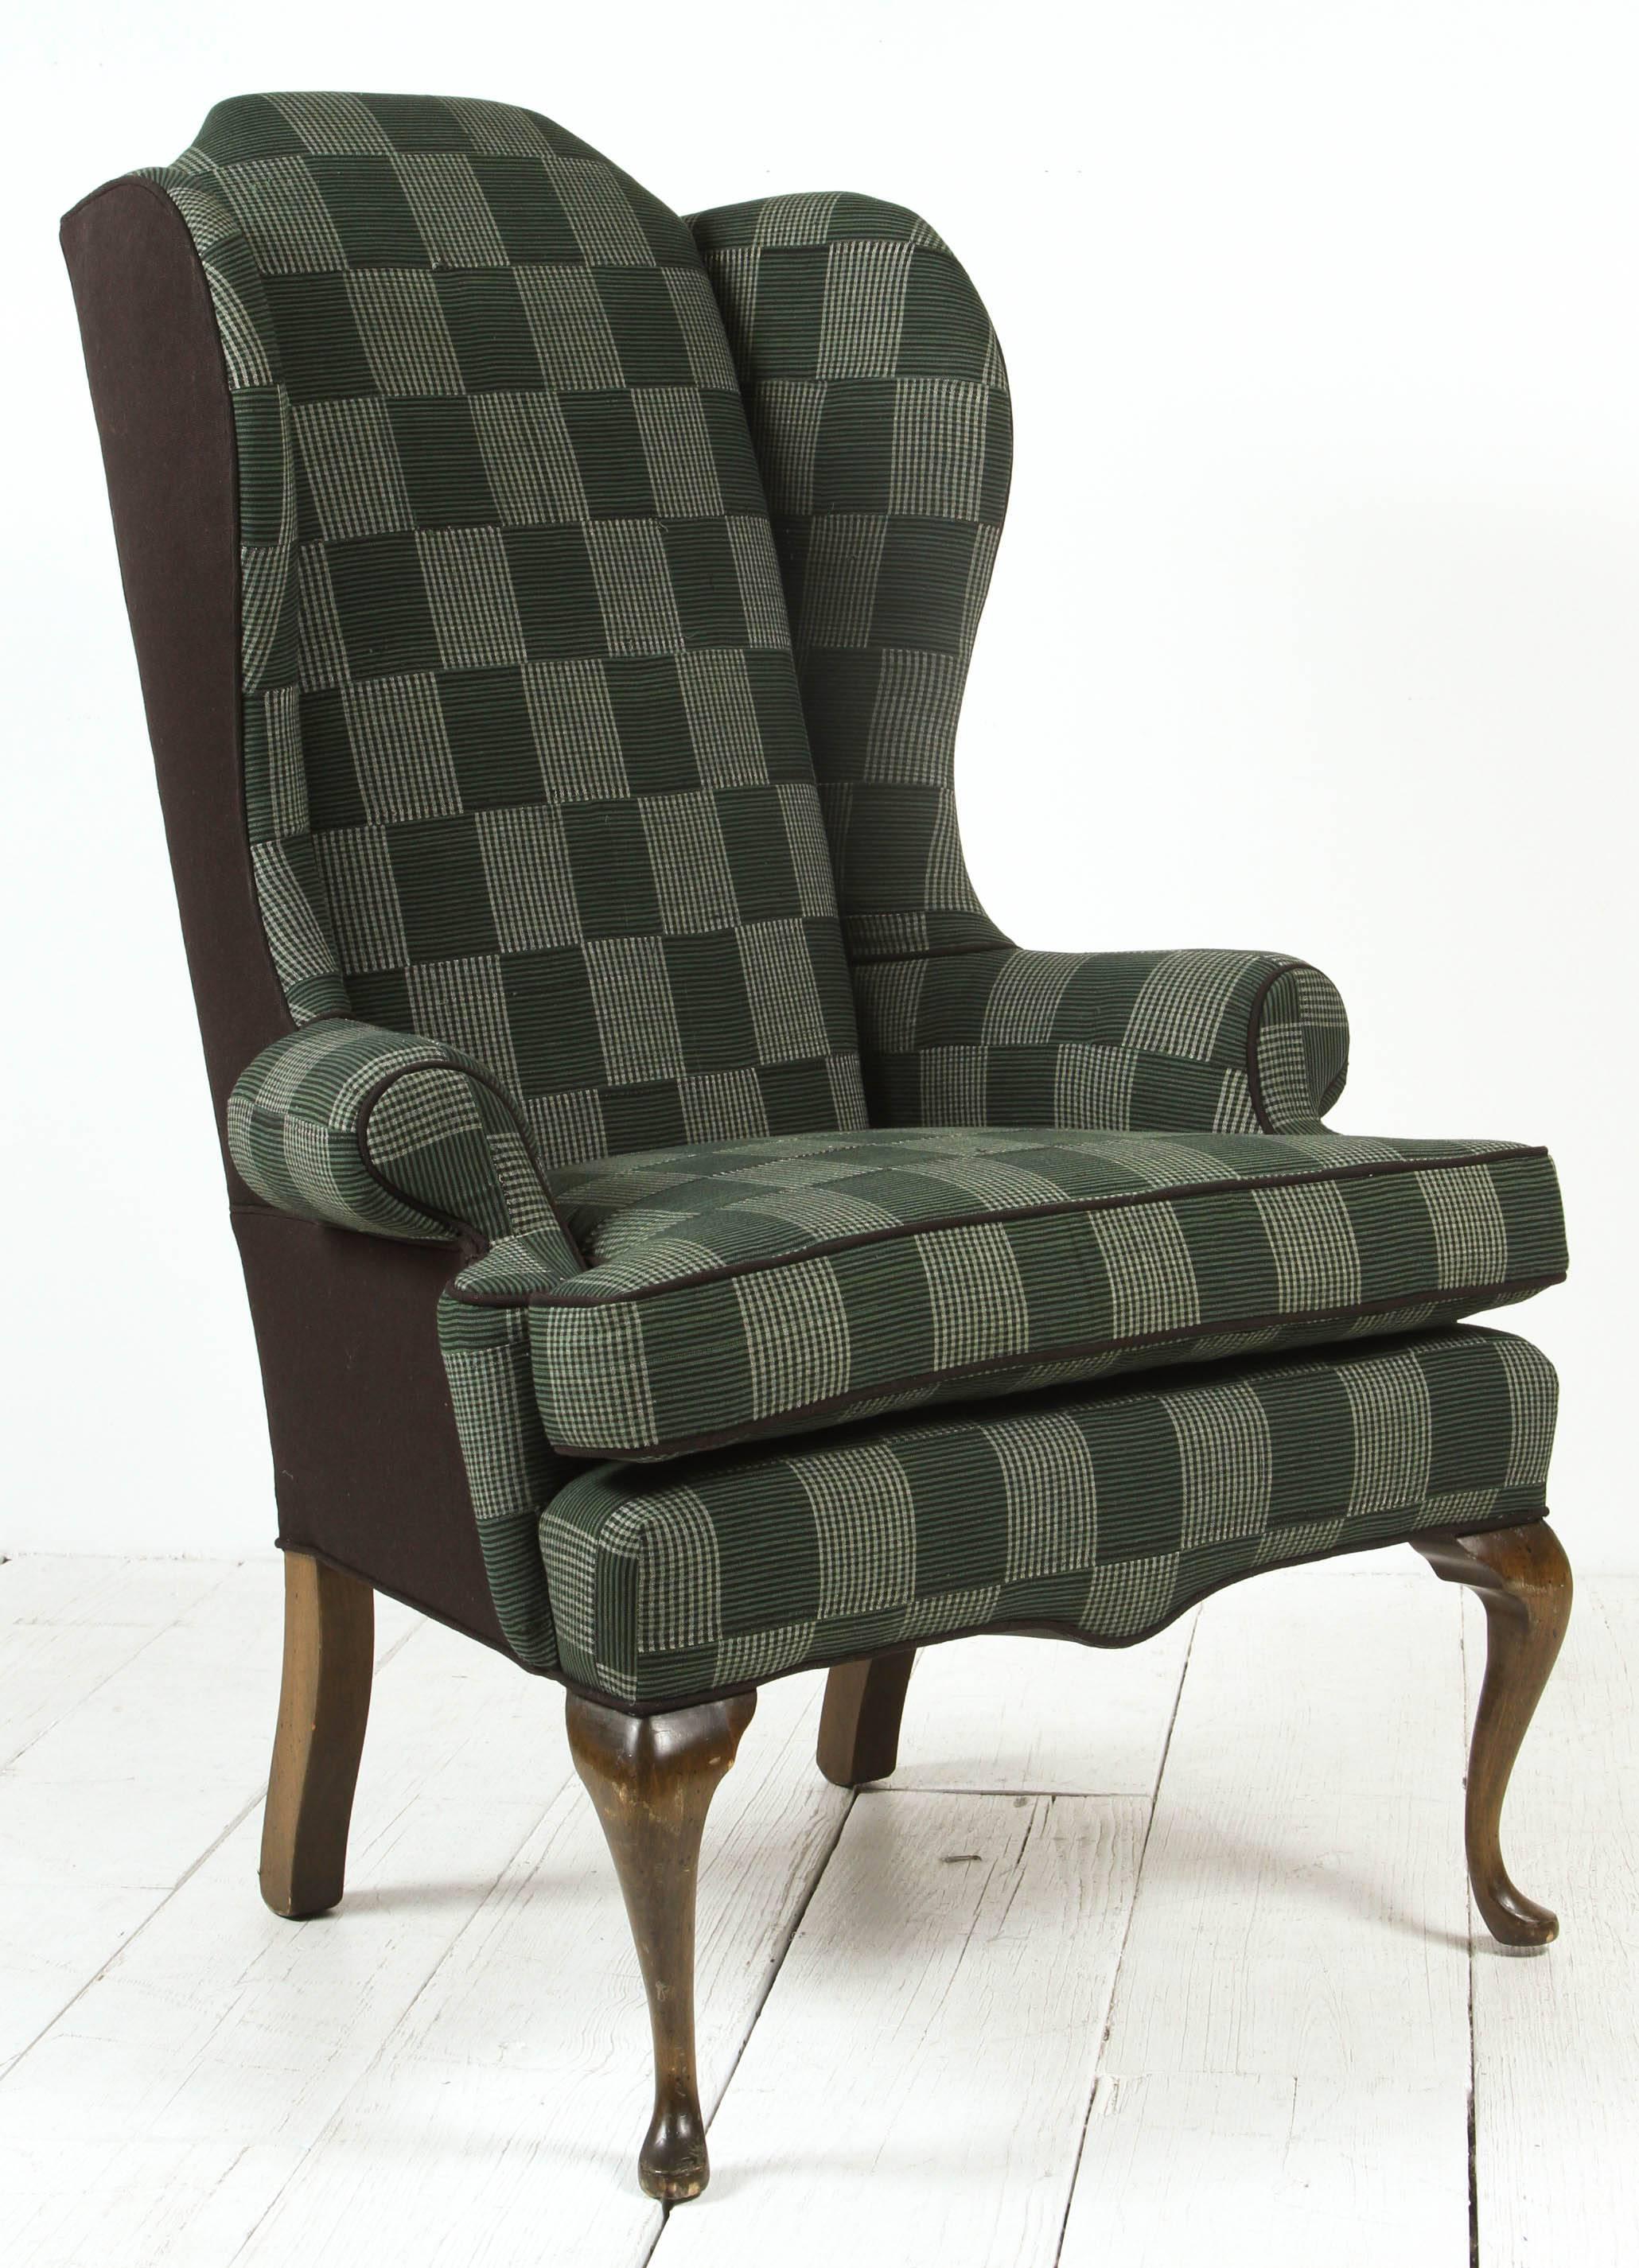 Classical wing chair with oak legs reupholstered in green plaid African fabric and black linen on the exterior.